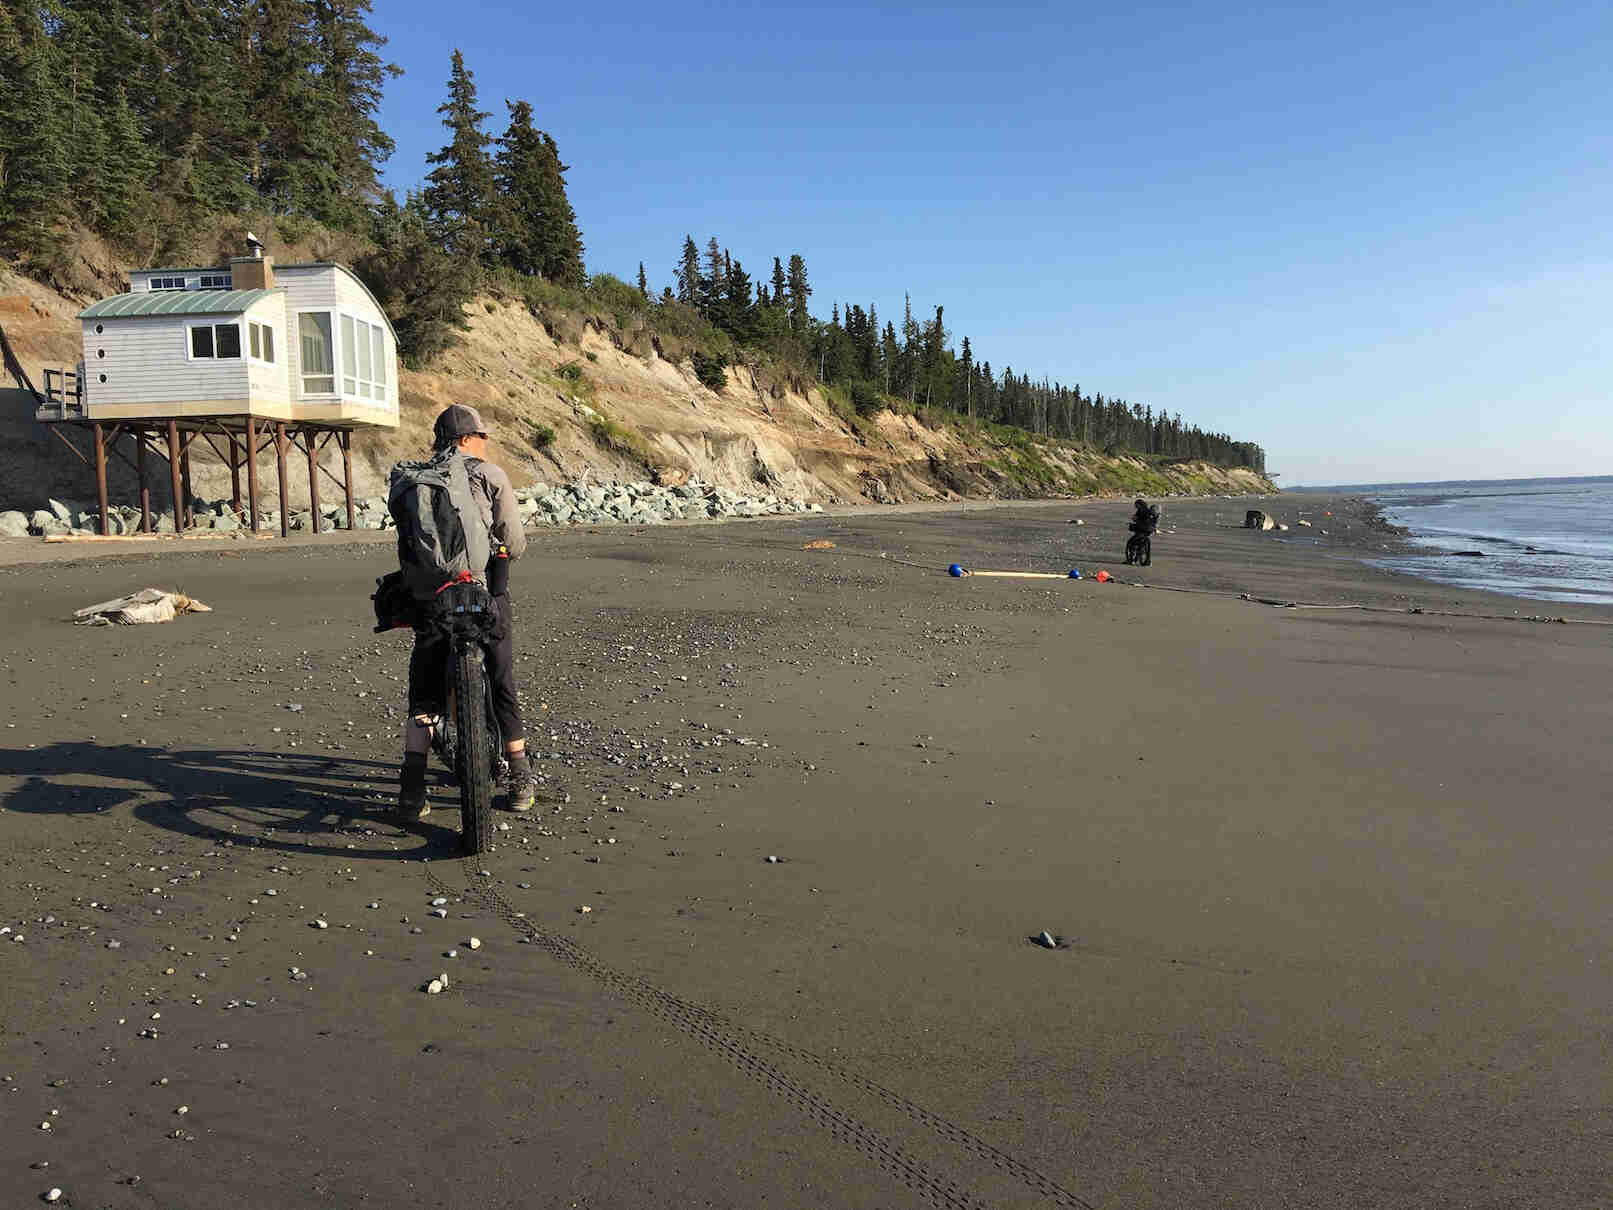 Rear view of a cyclist standing with their fat bike on a beach with water to the right, a building on stilts